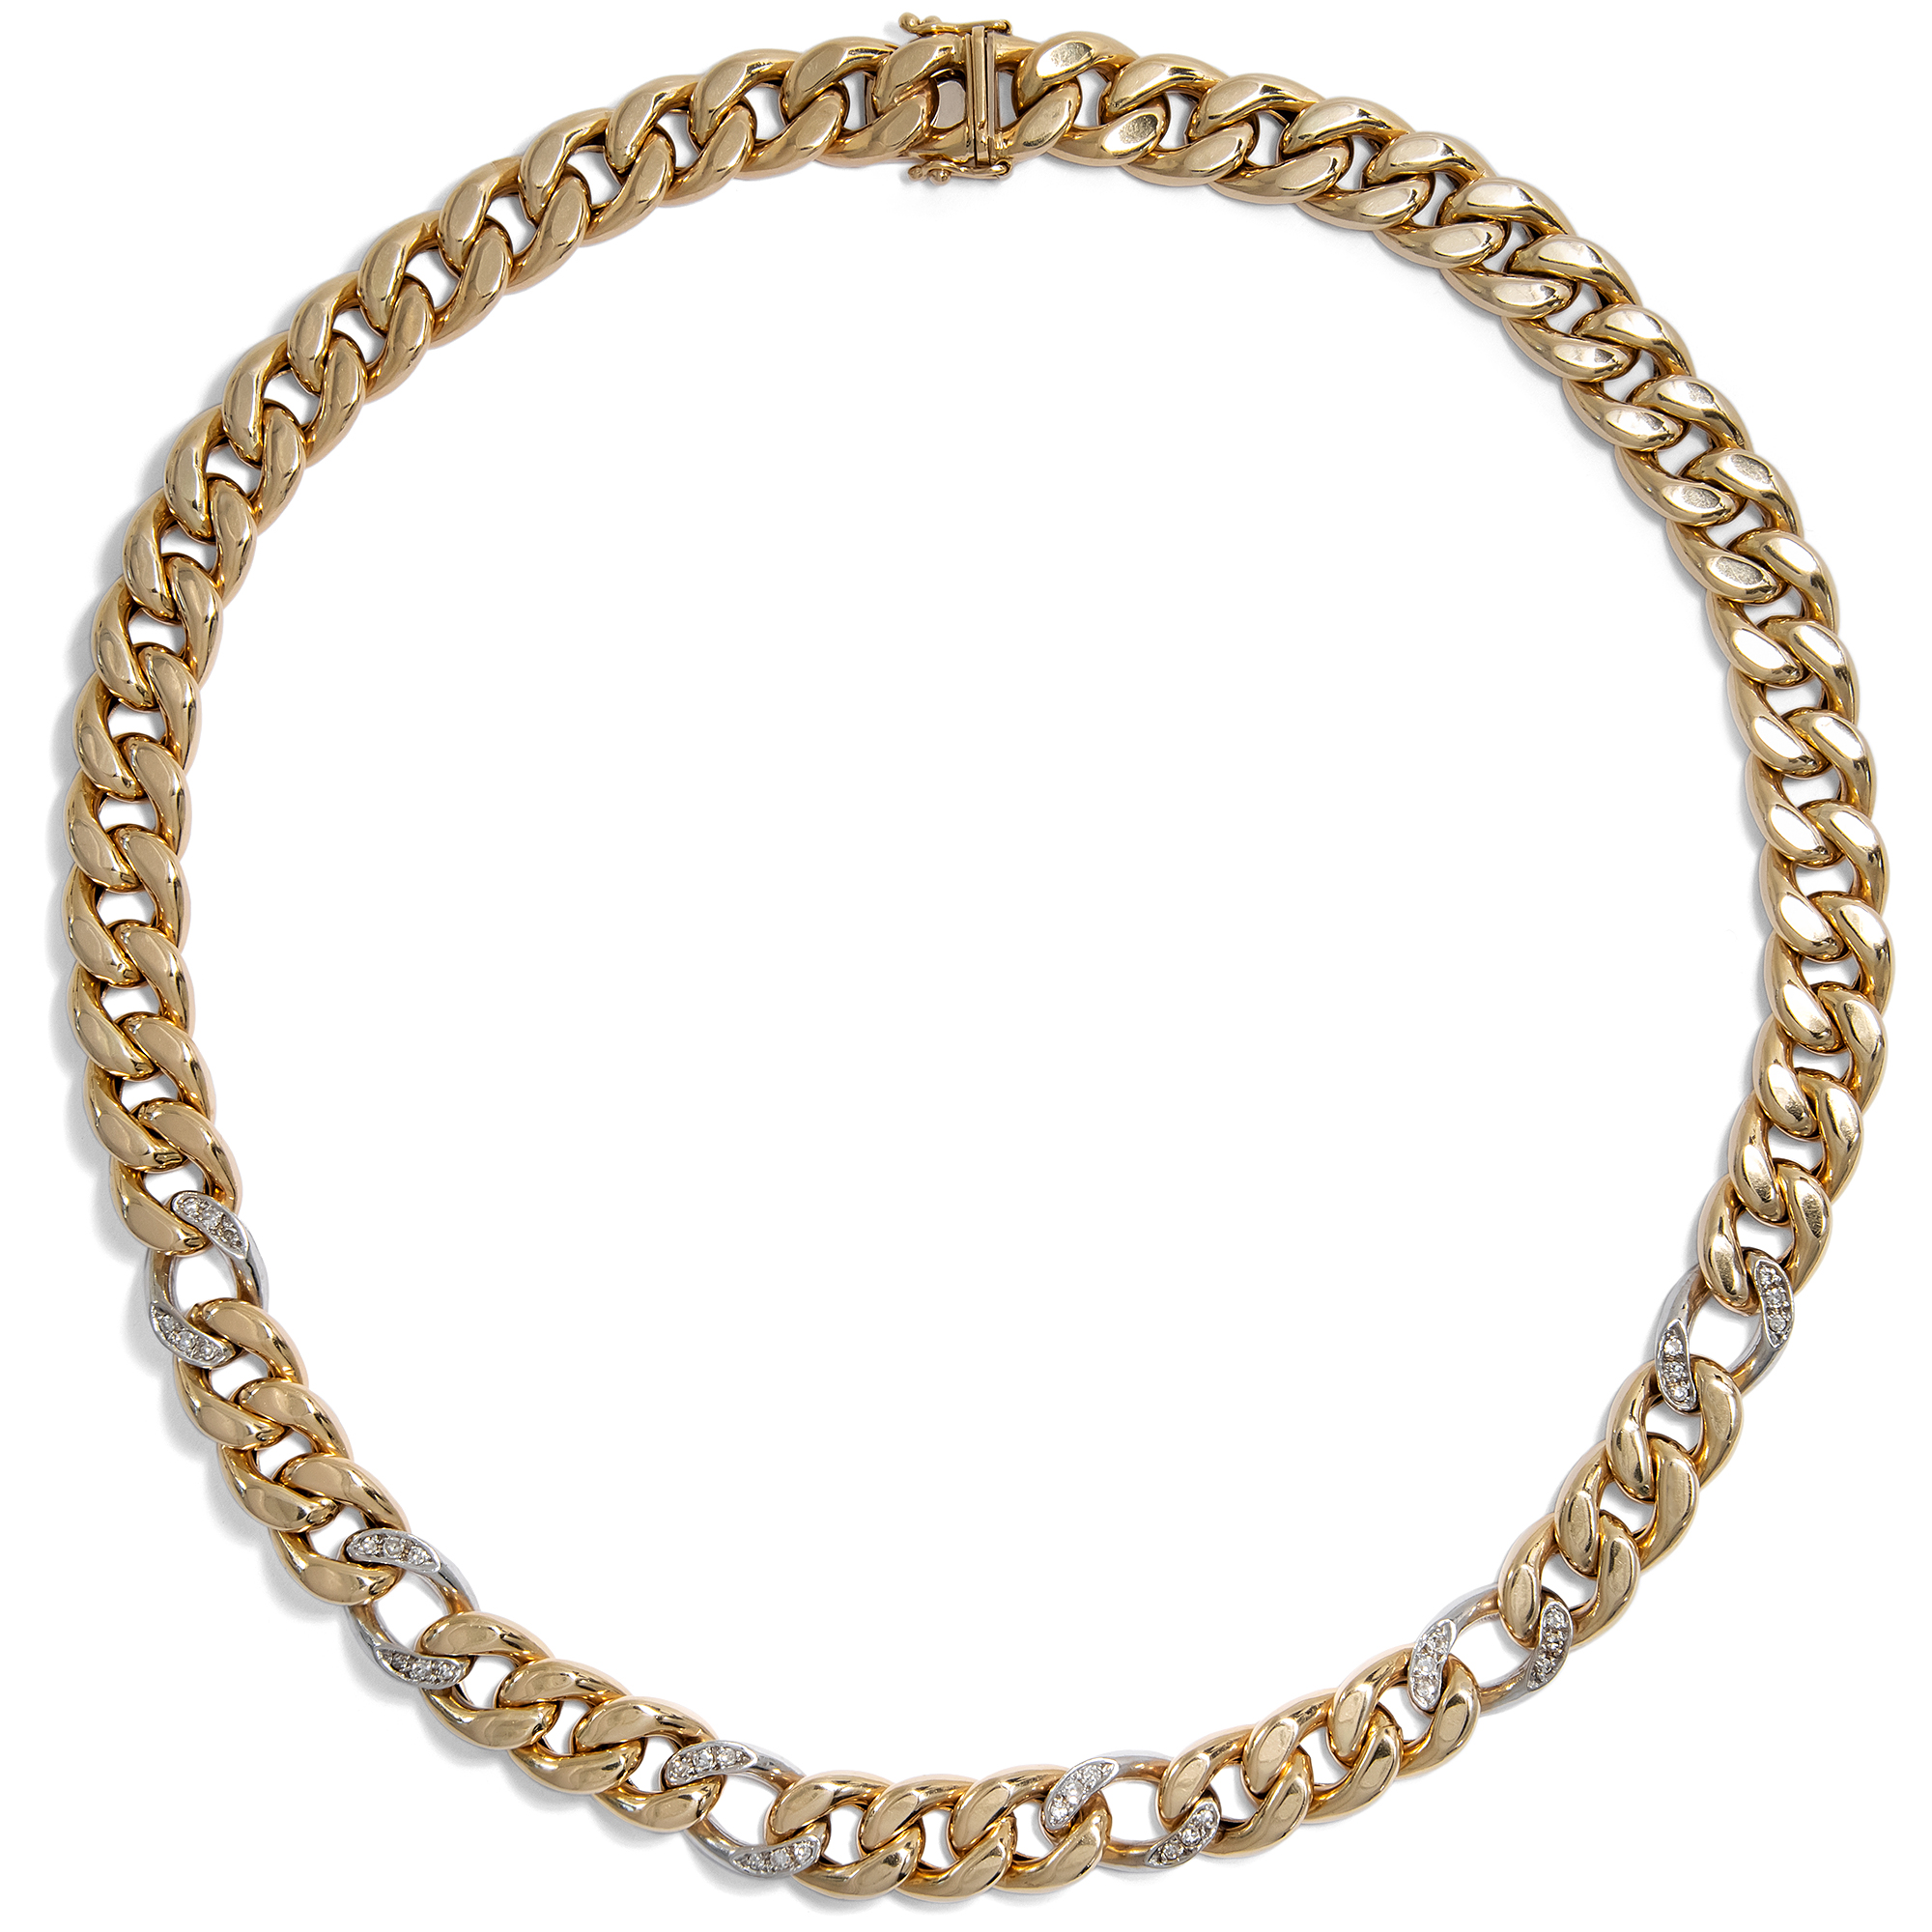 Wide Curb chain in Yellow and White Gold With Diamonds, Germany Circa 1975